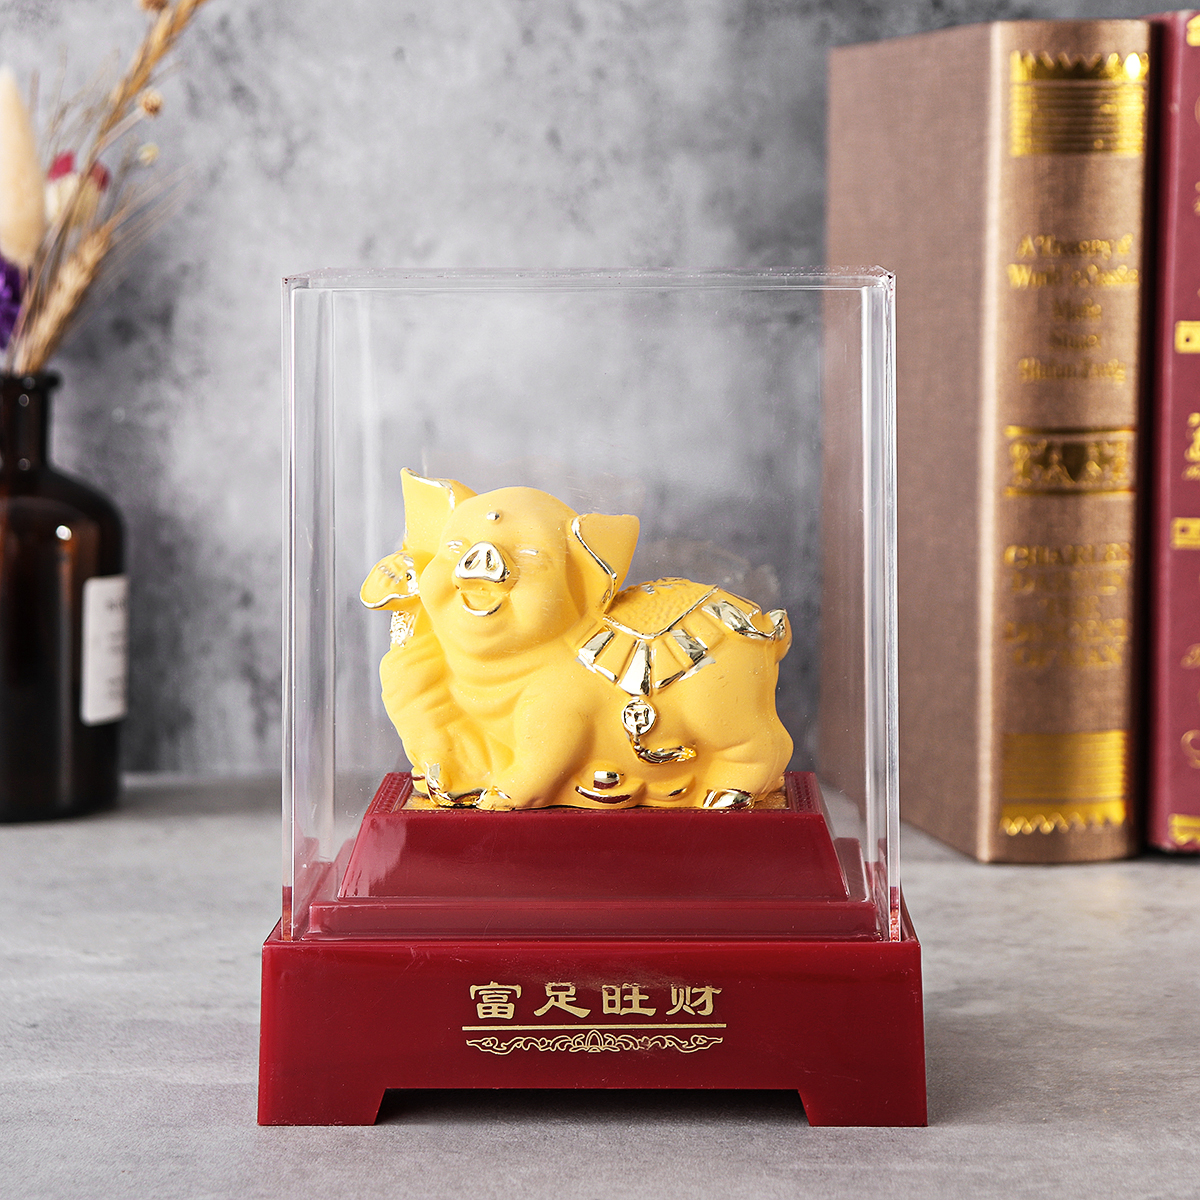 2019-Chinese-Zodiac-Gold-Pig-Money-Wealth-Statue-Office-Home-Decorations-Ornament-Gift-1515810-6